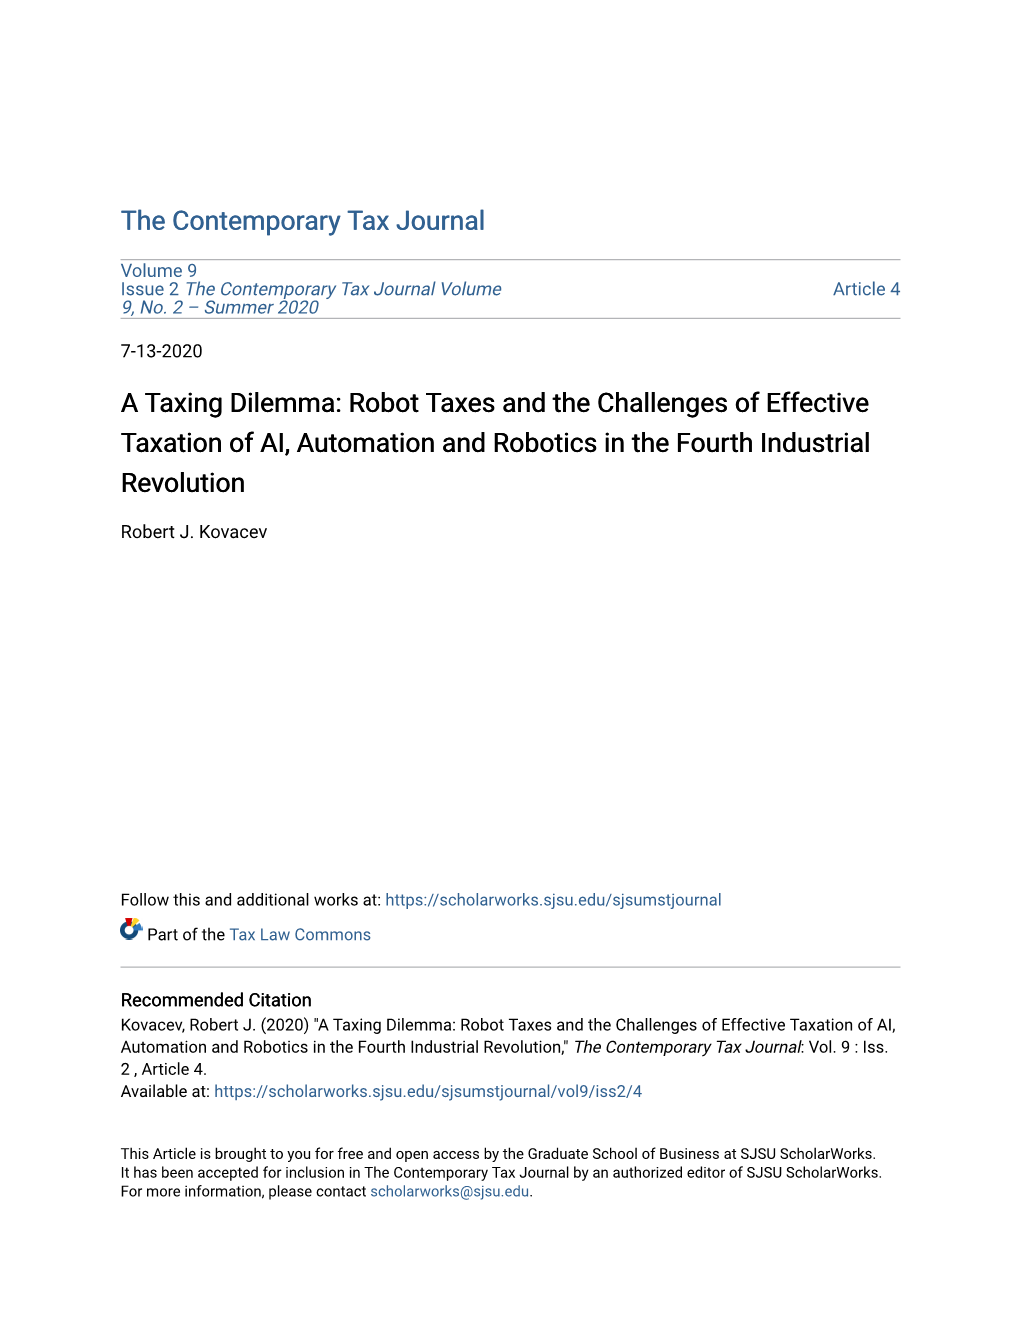 Robot Taxes and the Challenges of Effective Taxation of AI, Automation and Robotics in the Fourth Industrial Revolution